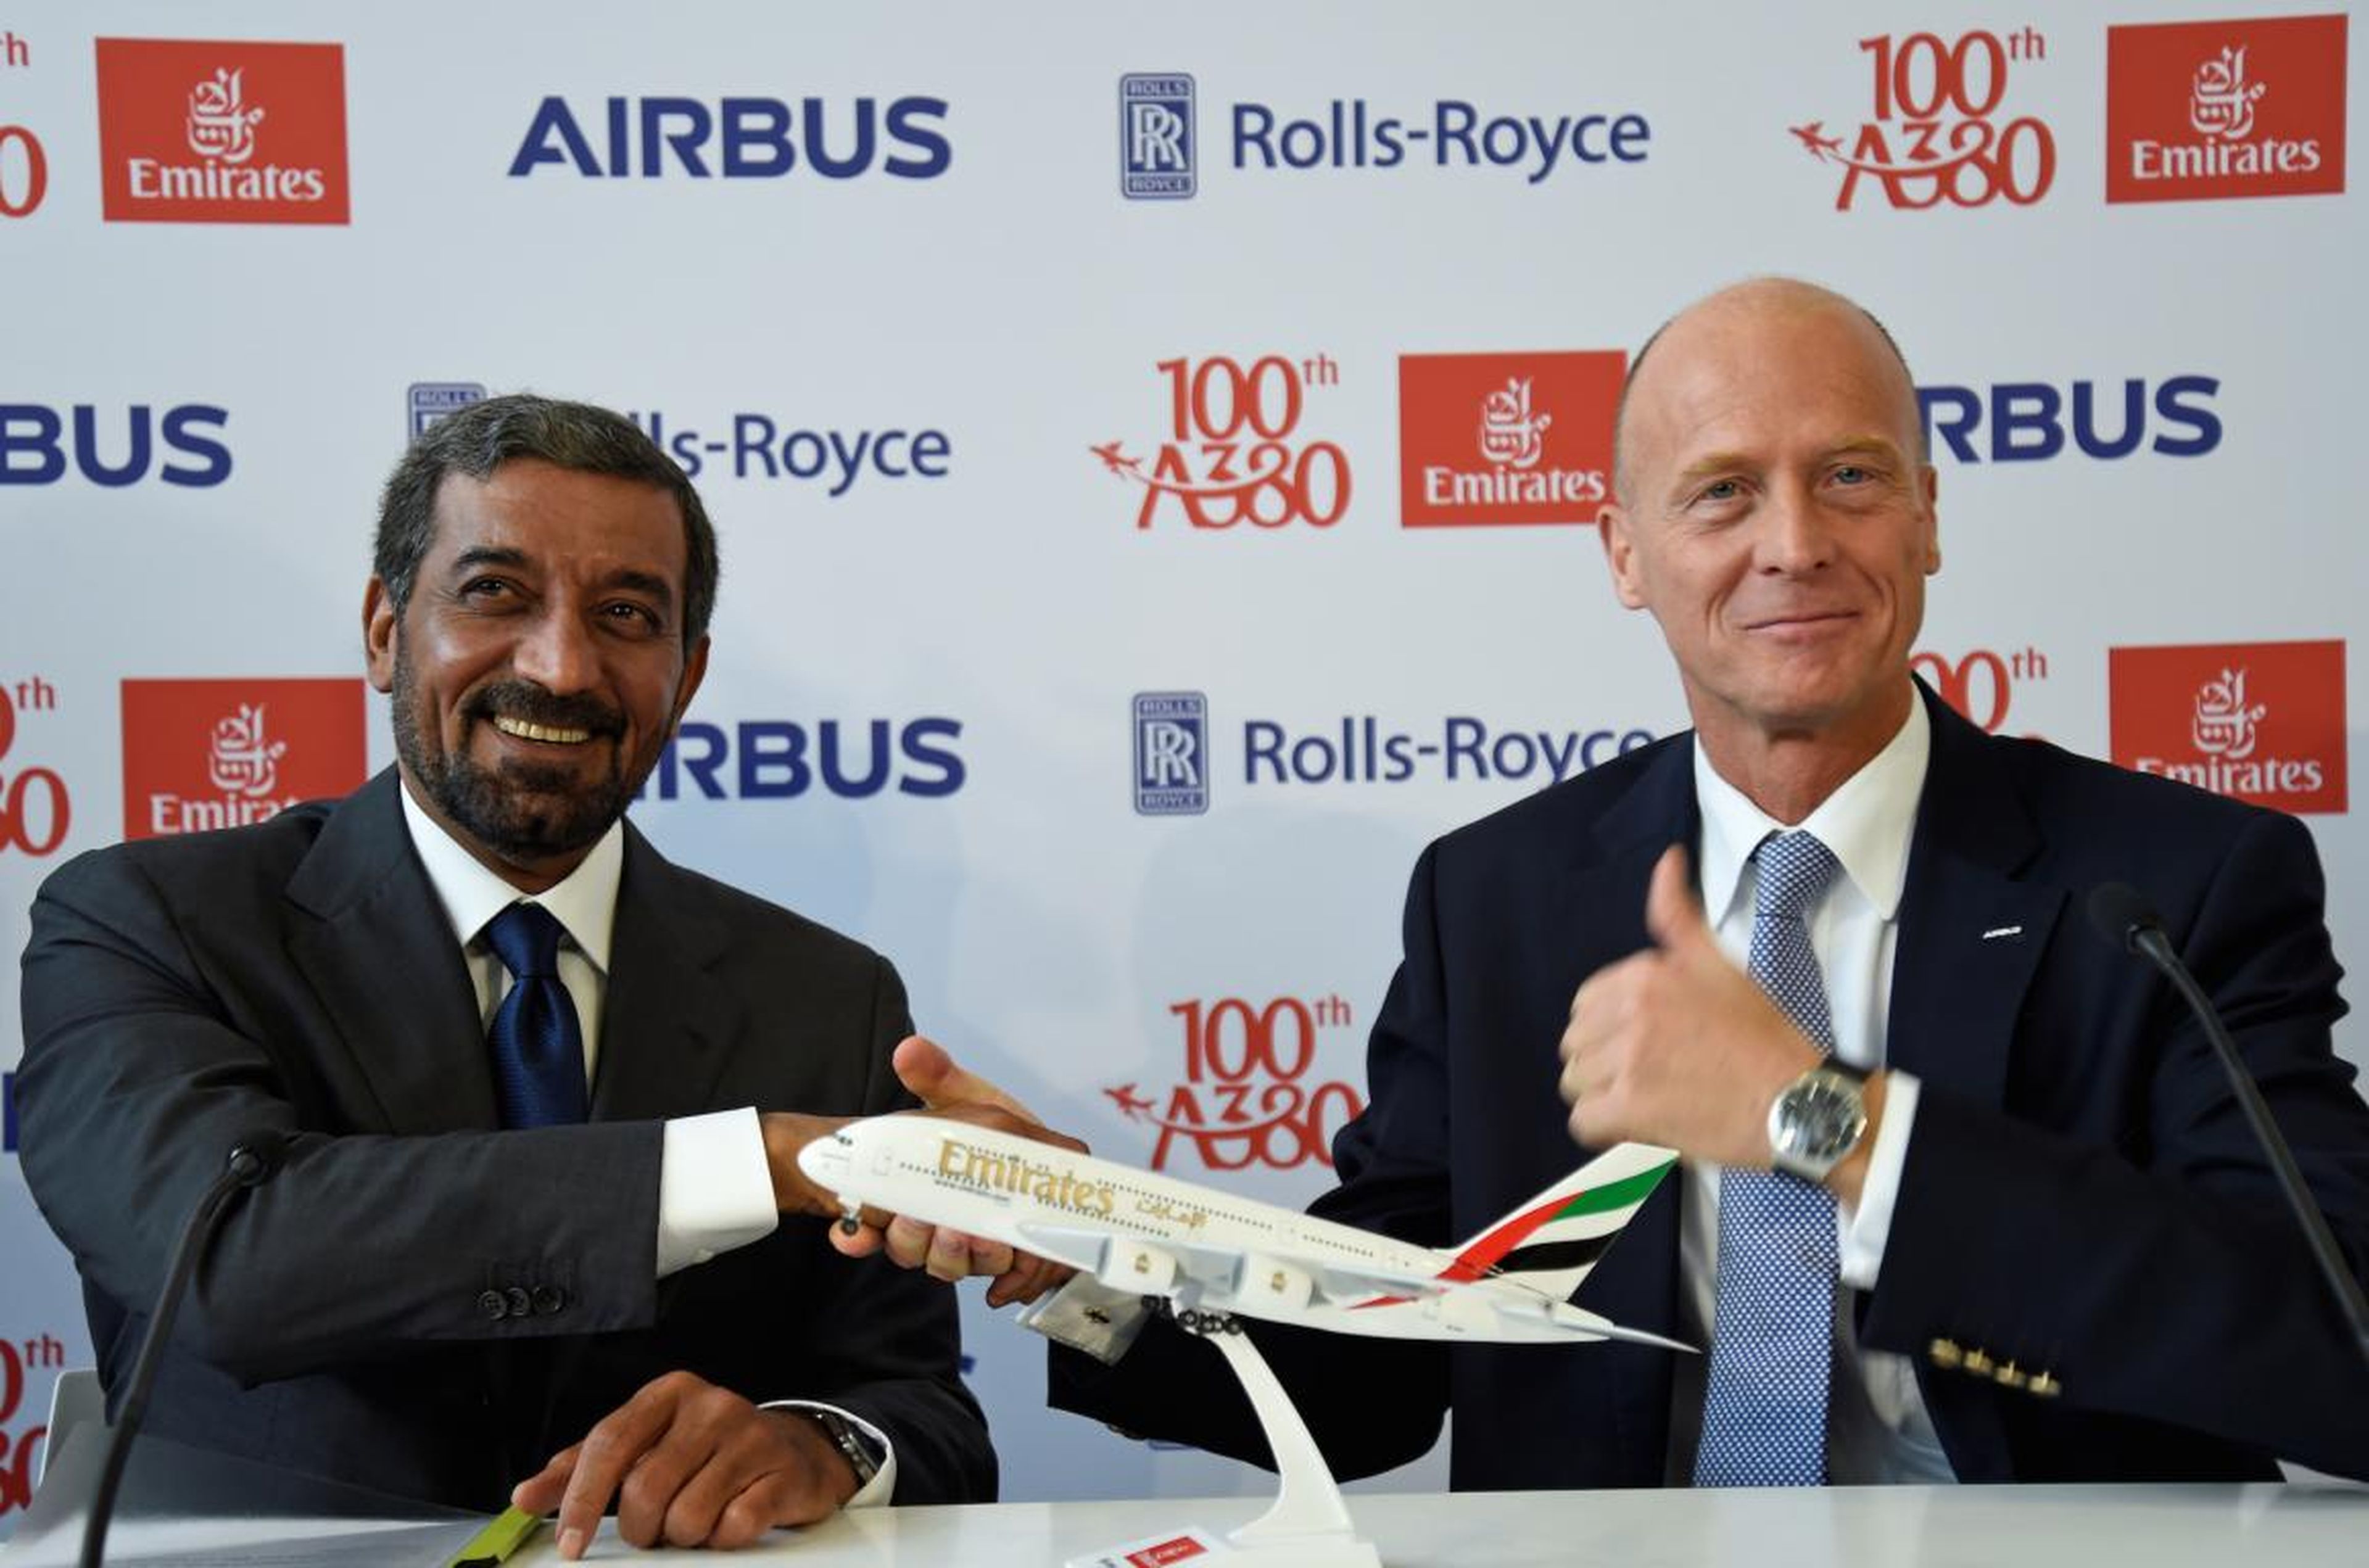 But no customer is more important than Emirates and its CEO, Shiekh Ahmed bin Saeed Al Maktoum, seen here with Airbus CEO Tom Enders.